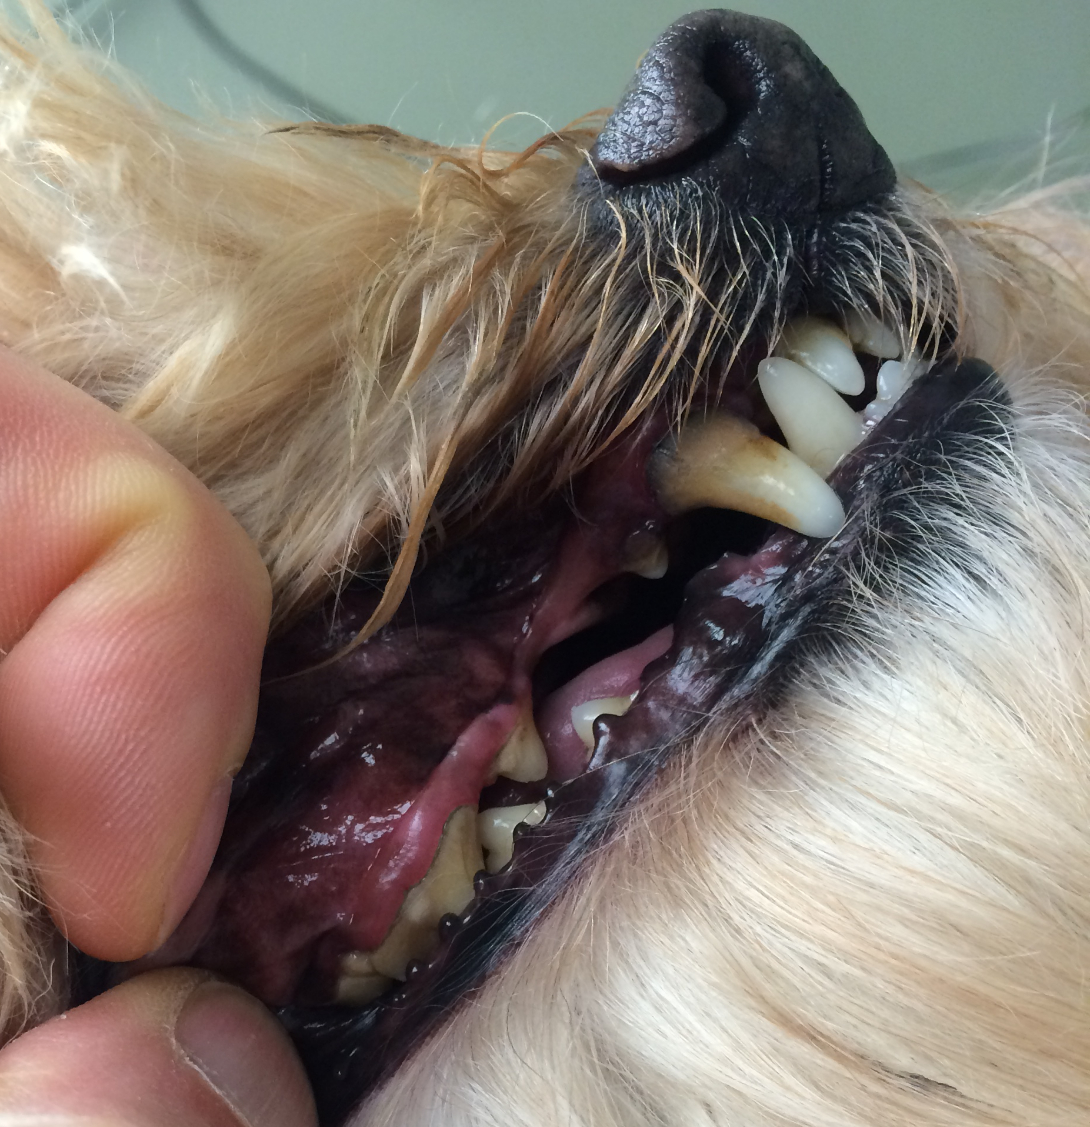 Periodontal disease made worse by wet dirty hair contacting canine tooth, note gum recession